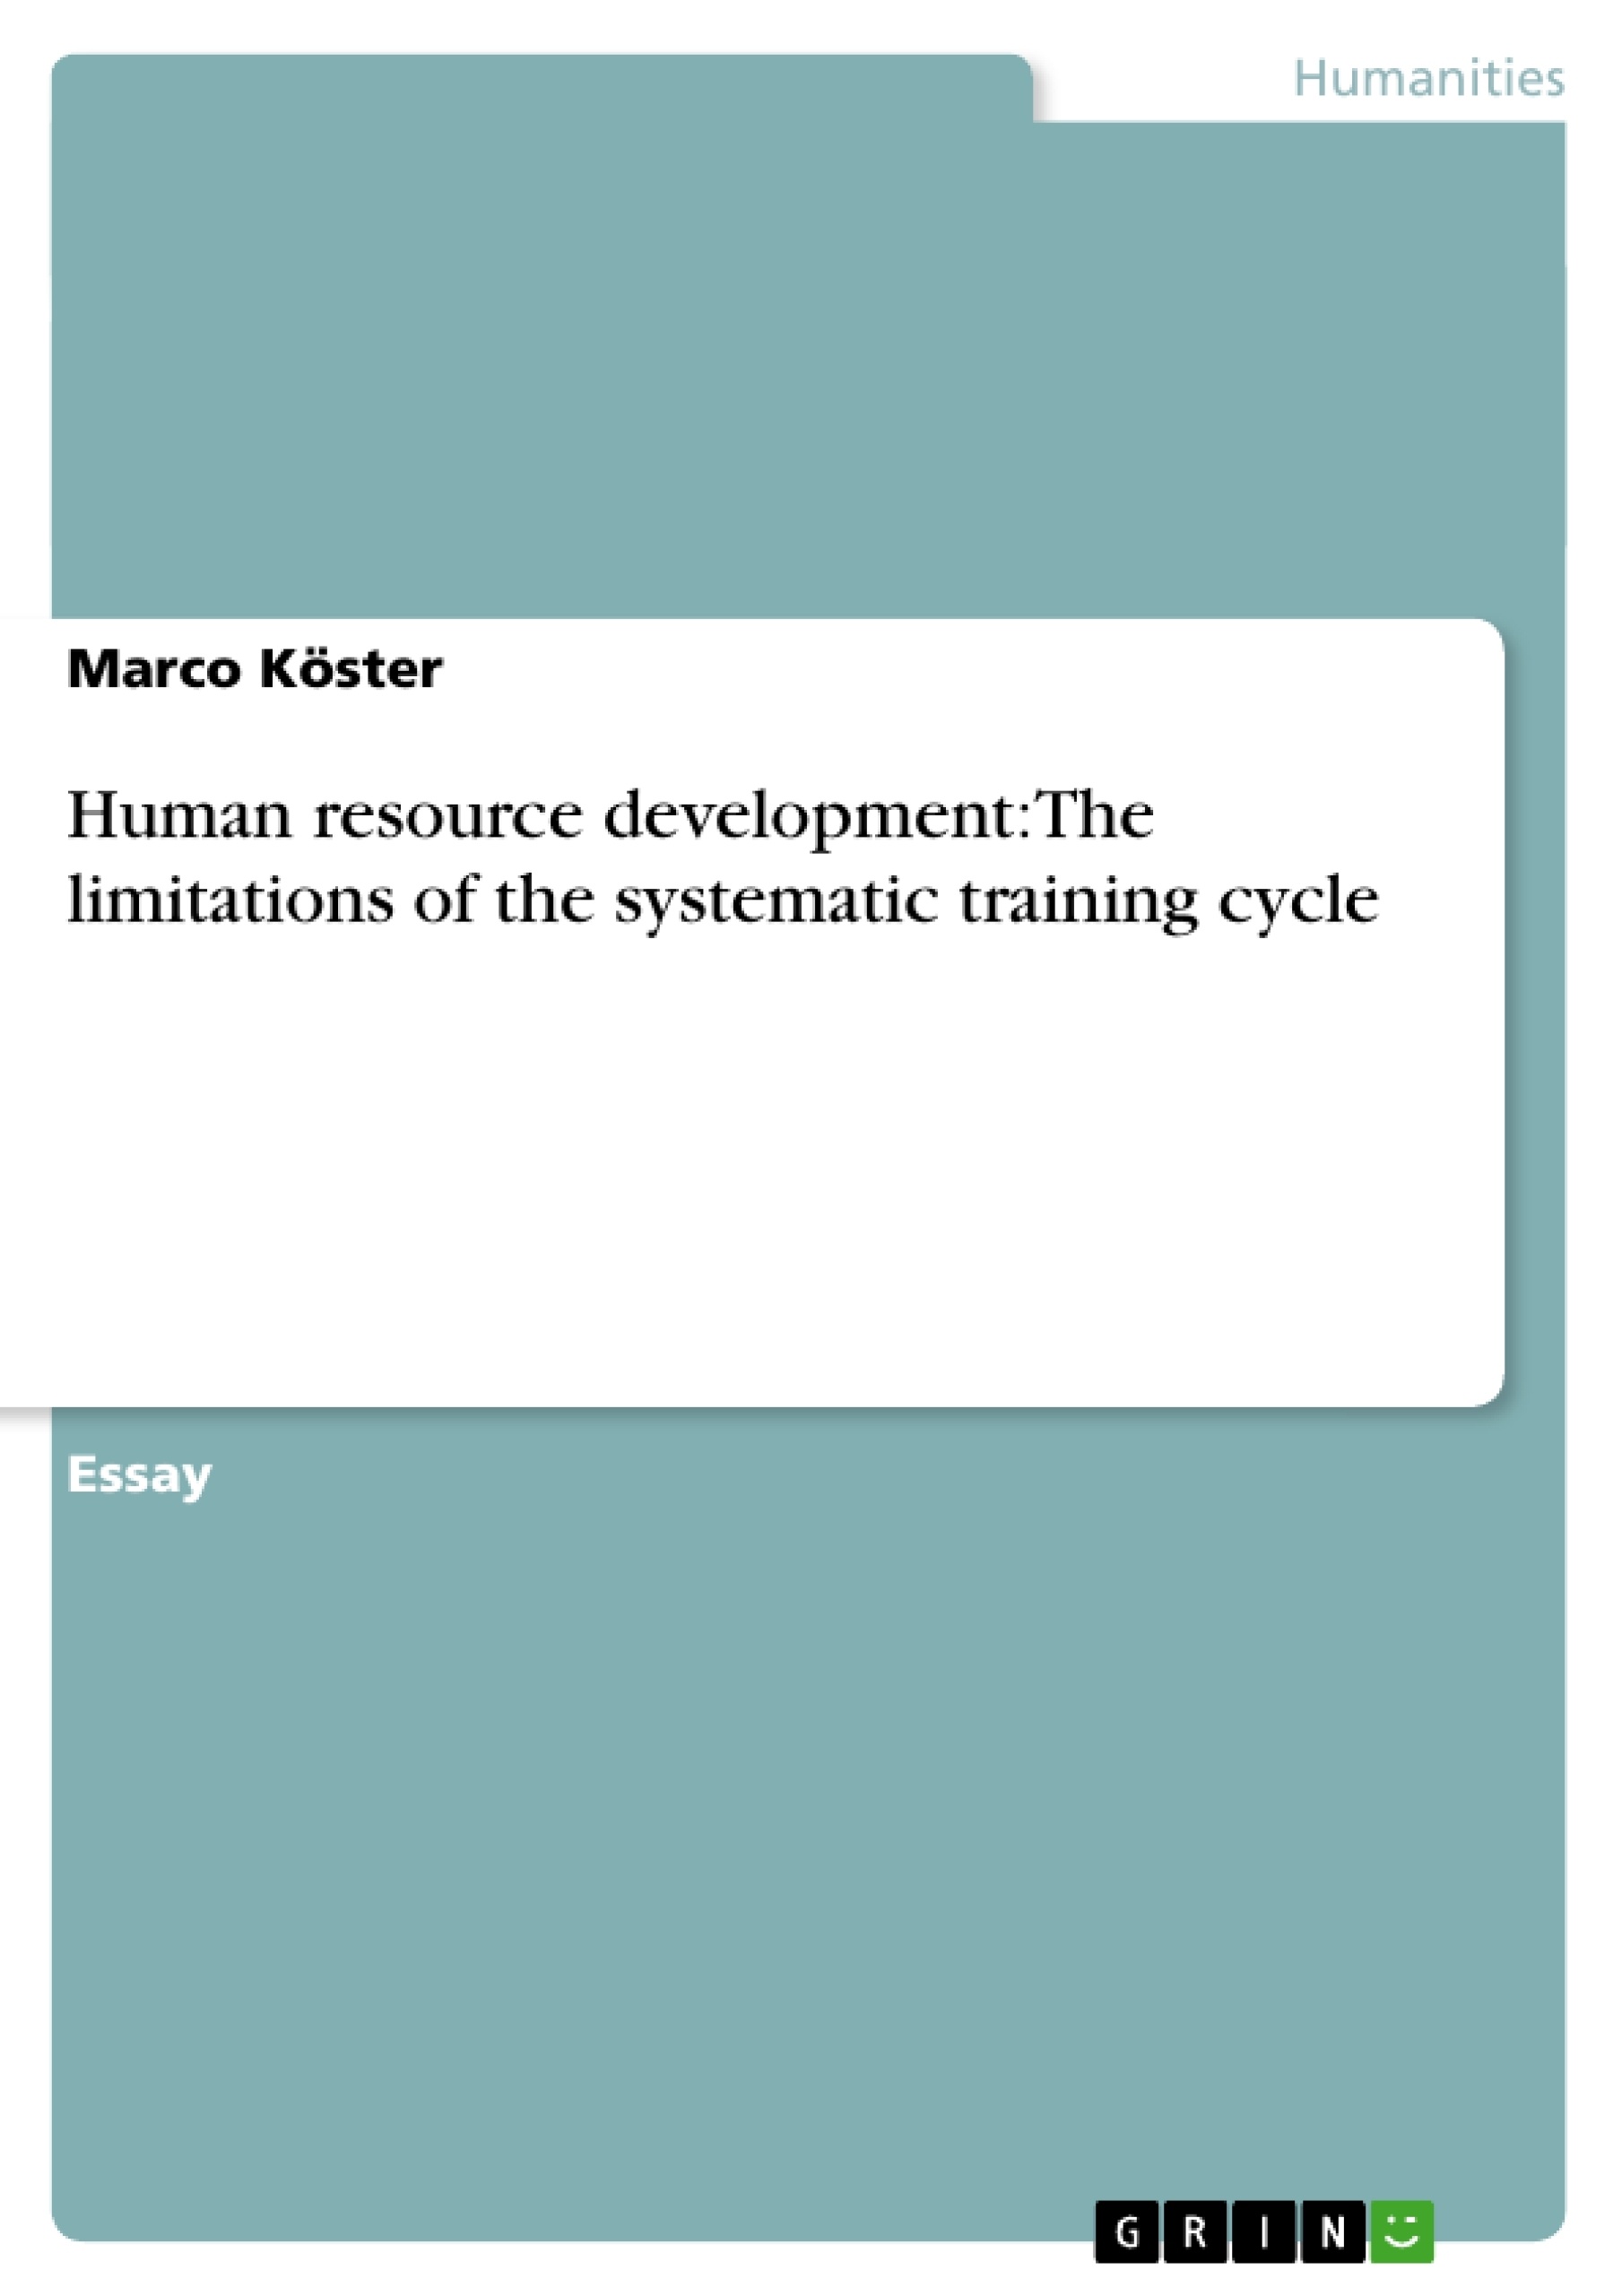 Title: Human resource development:The limitations of the systematic training cycle